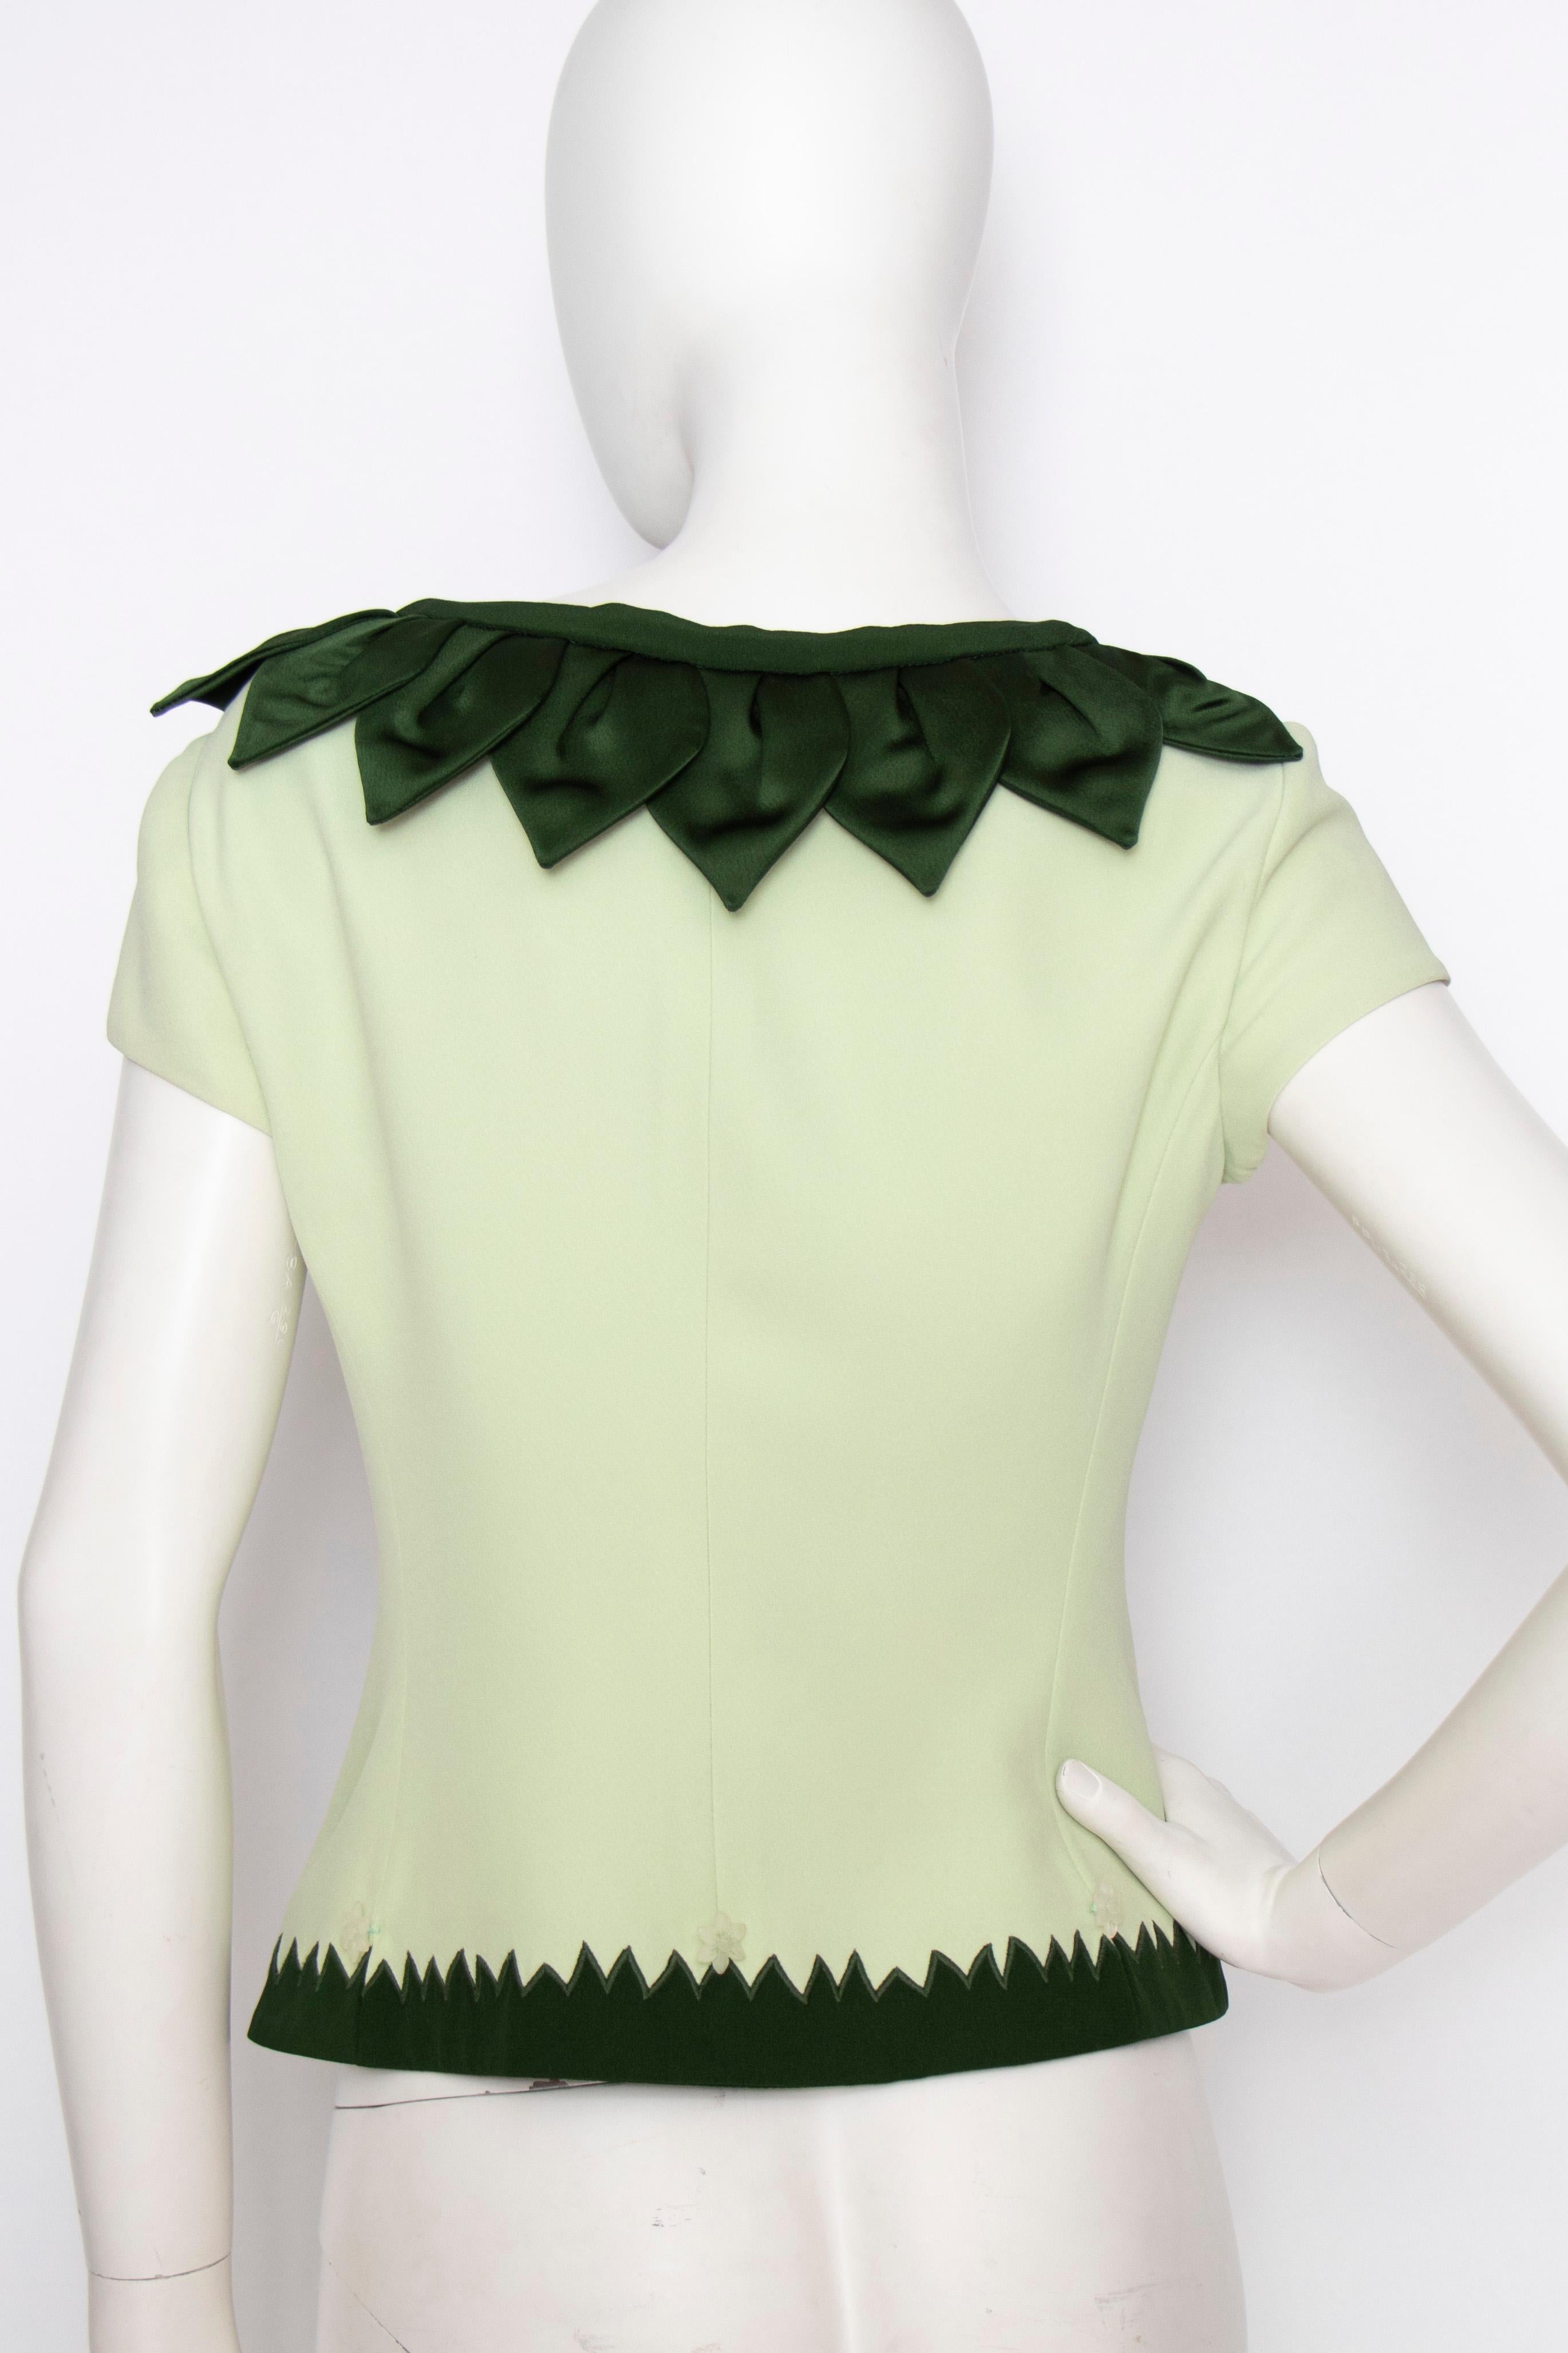 A 1990s Vintage Moschino Cheap and Chic Plant Appliqué Crêpe Blouse In Good Condition For Sale In Copenhagen, DK